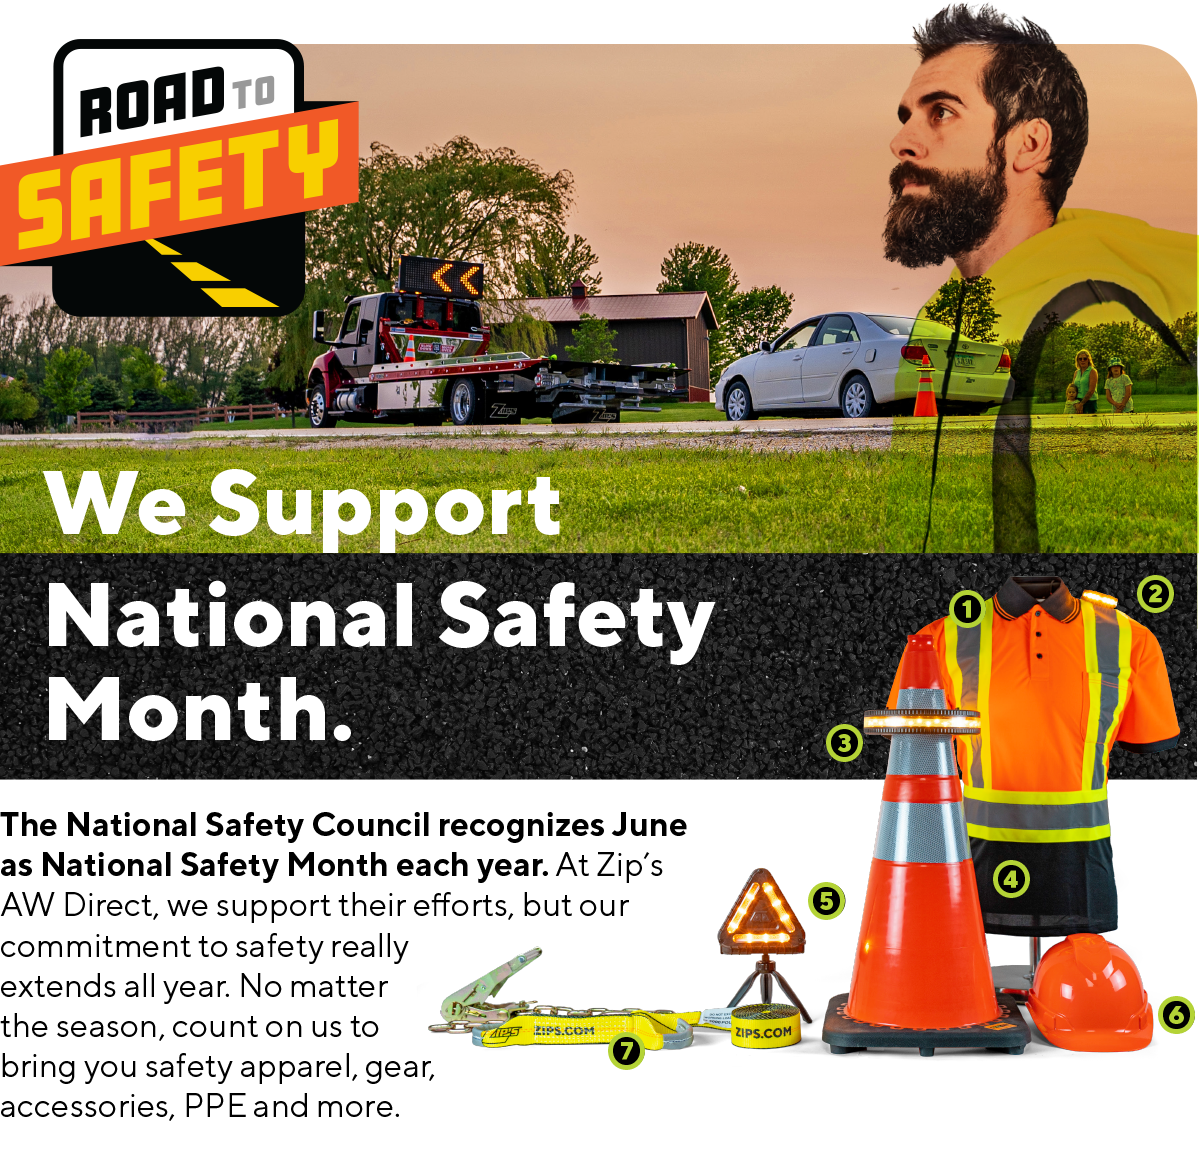 We Support National Safety Month